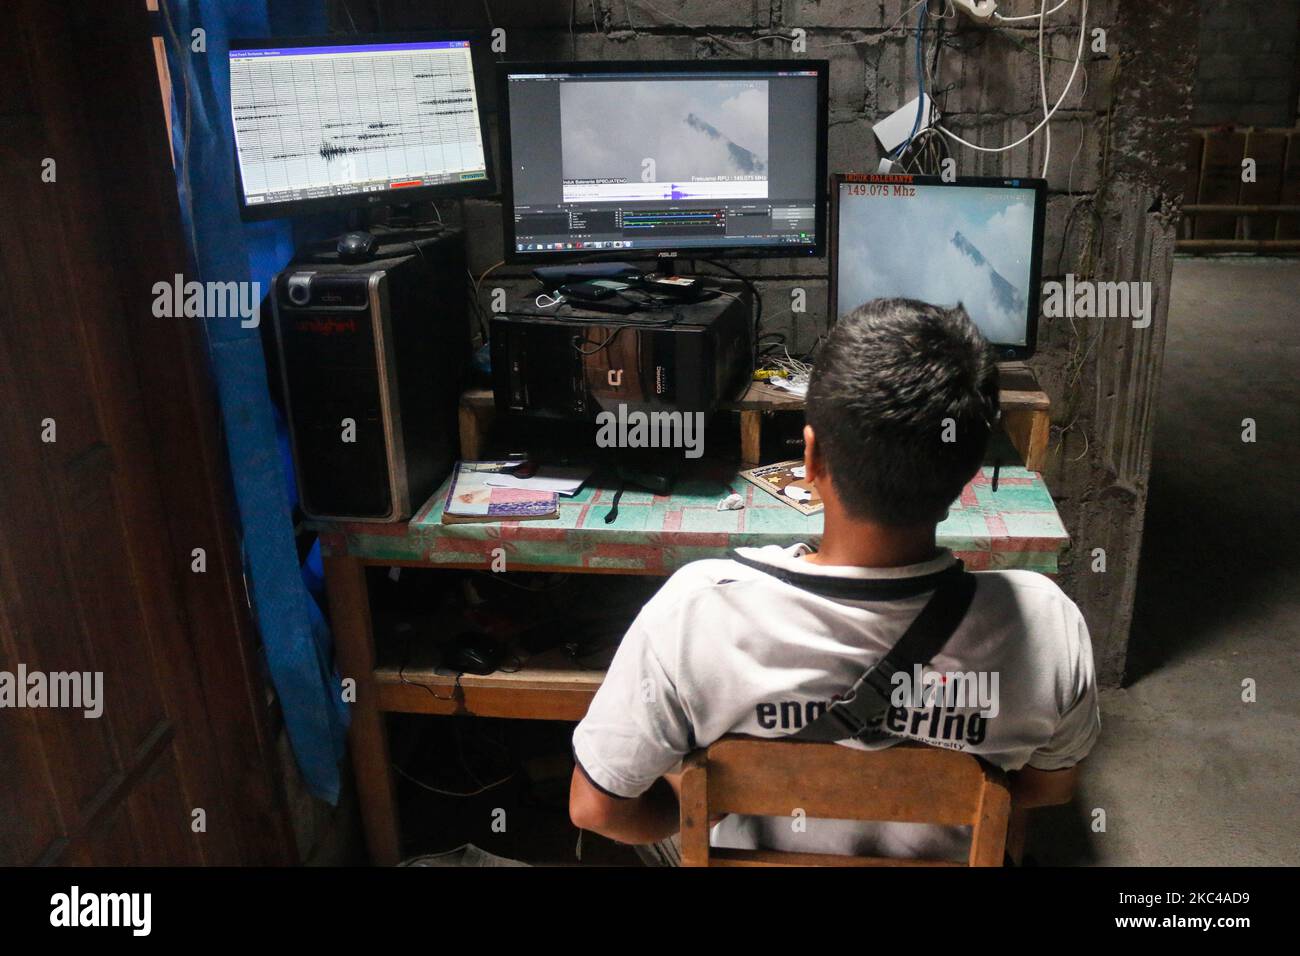 A natural disaster volunteers monitors the activity of merapi volcano through Closed Circuit Television (CCTV) at Mount Merapi monitoring station on November 21, 2020 in Balerante, Kemalang, Klaten, Central Java, Indonesia. Authorities in Indonesia issued raised the status of a level three alert and evacuated a densely populated village close to the summit of Mount Merapi, as the active volcano showed renewed signs of approaching an eruption. (Photo by Muhammad Ihsan/NurPhoto) Stock Photo